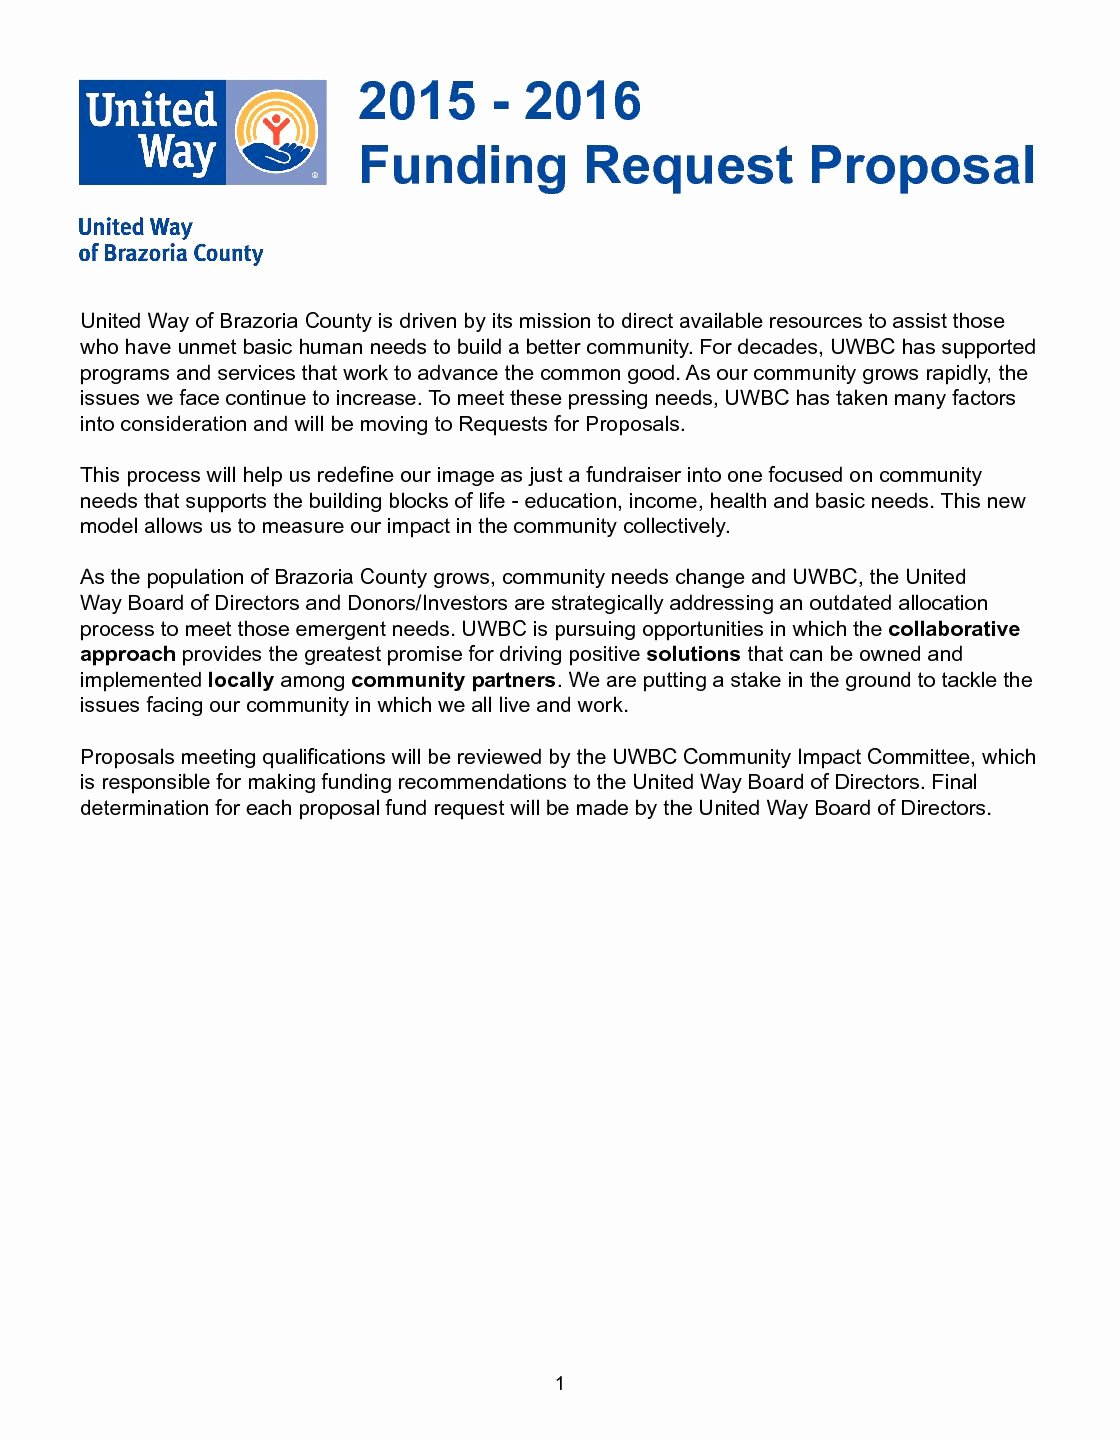 funding request proposal pdf